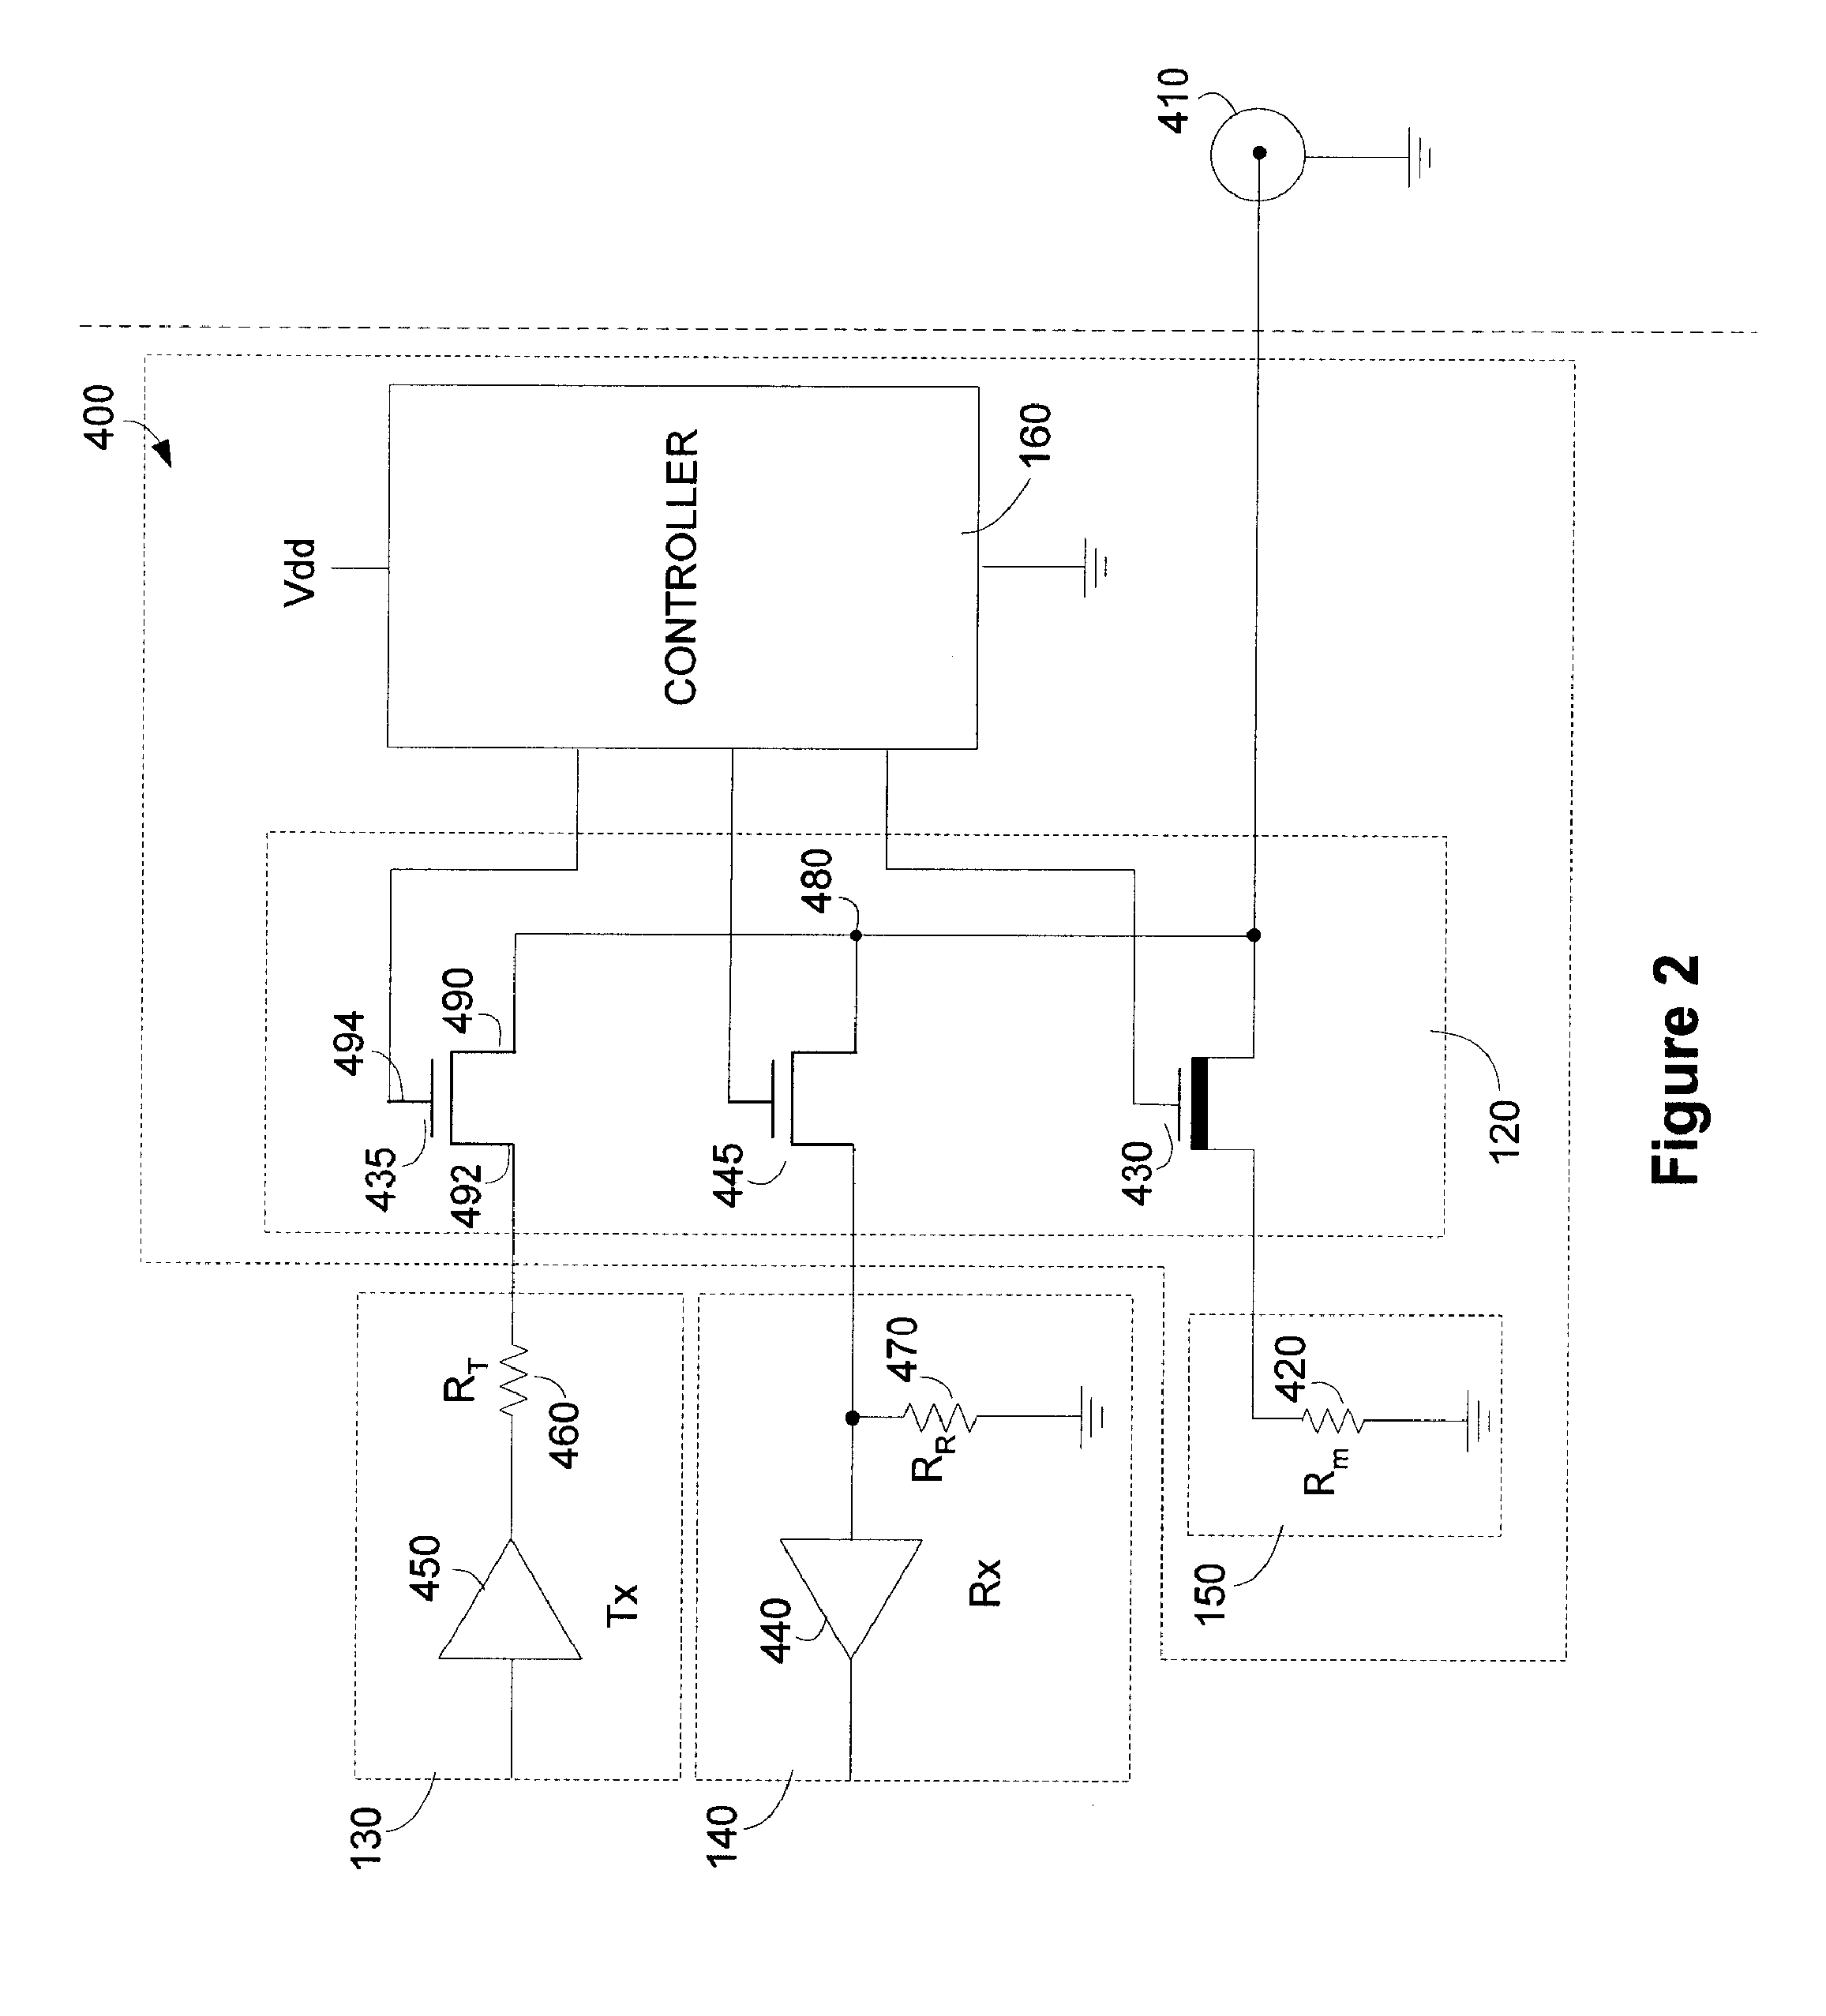 Impedance control for signal interface of a network node